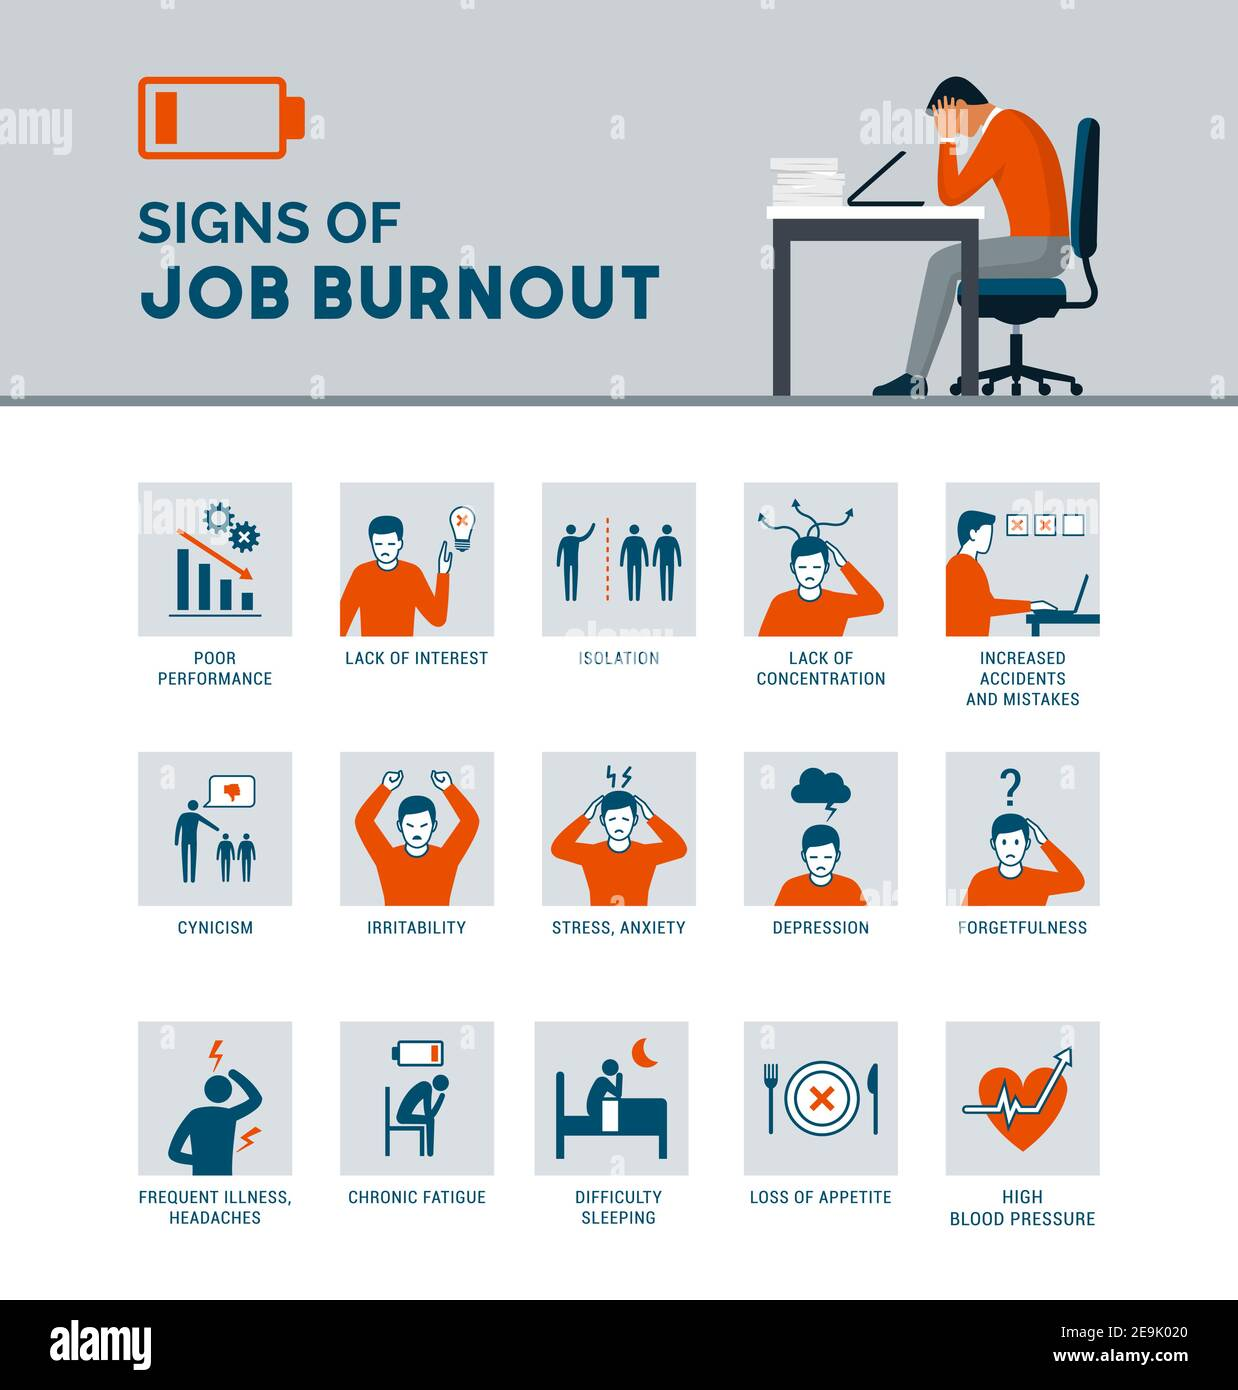 Recognizing the signs of burnout in your employees